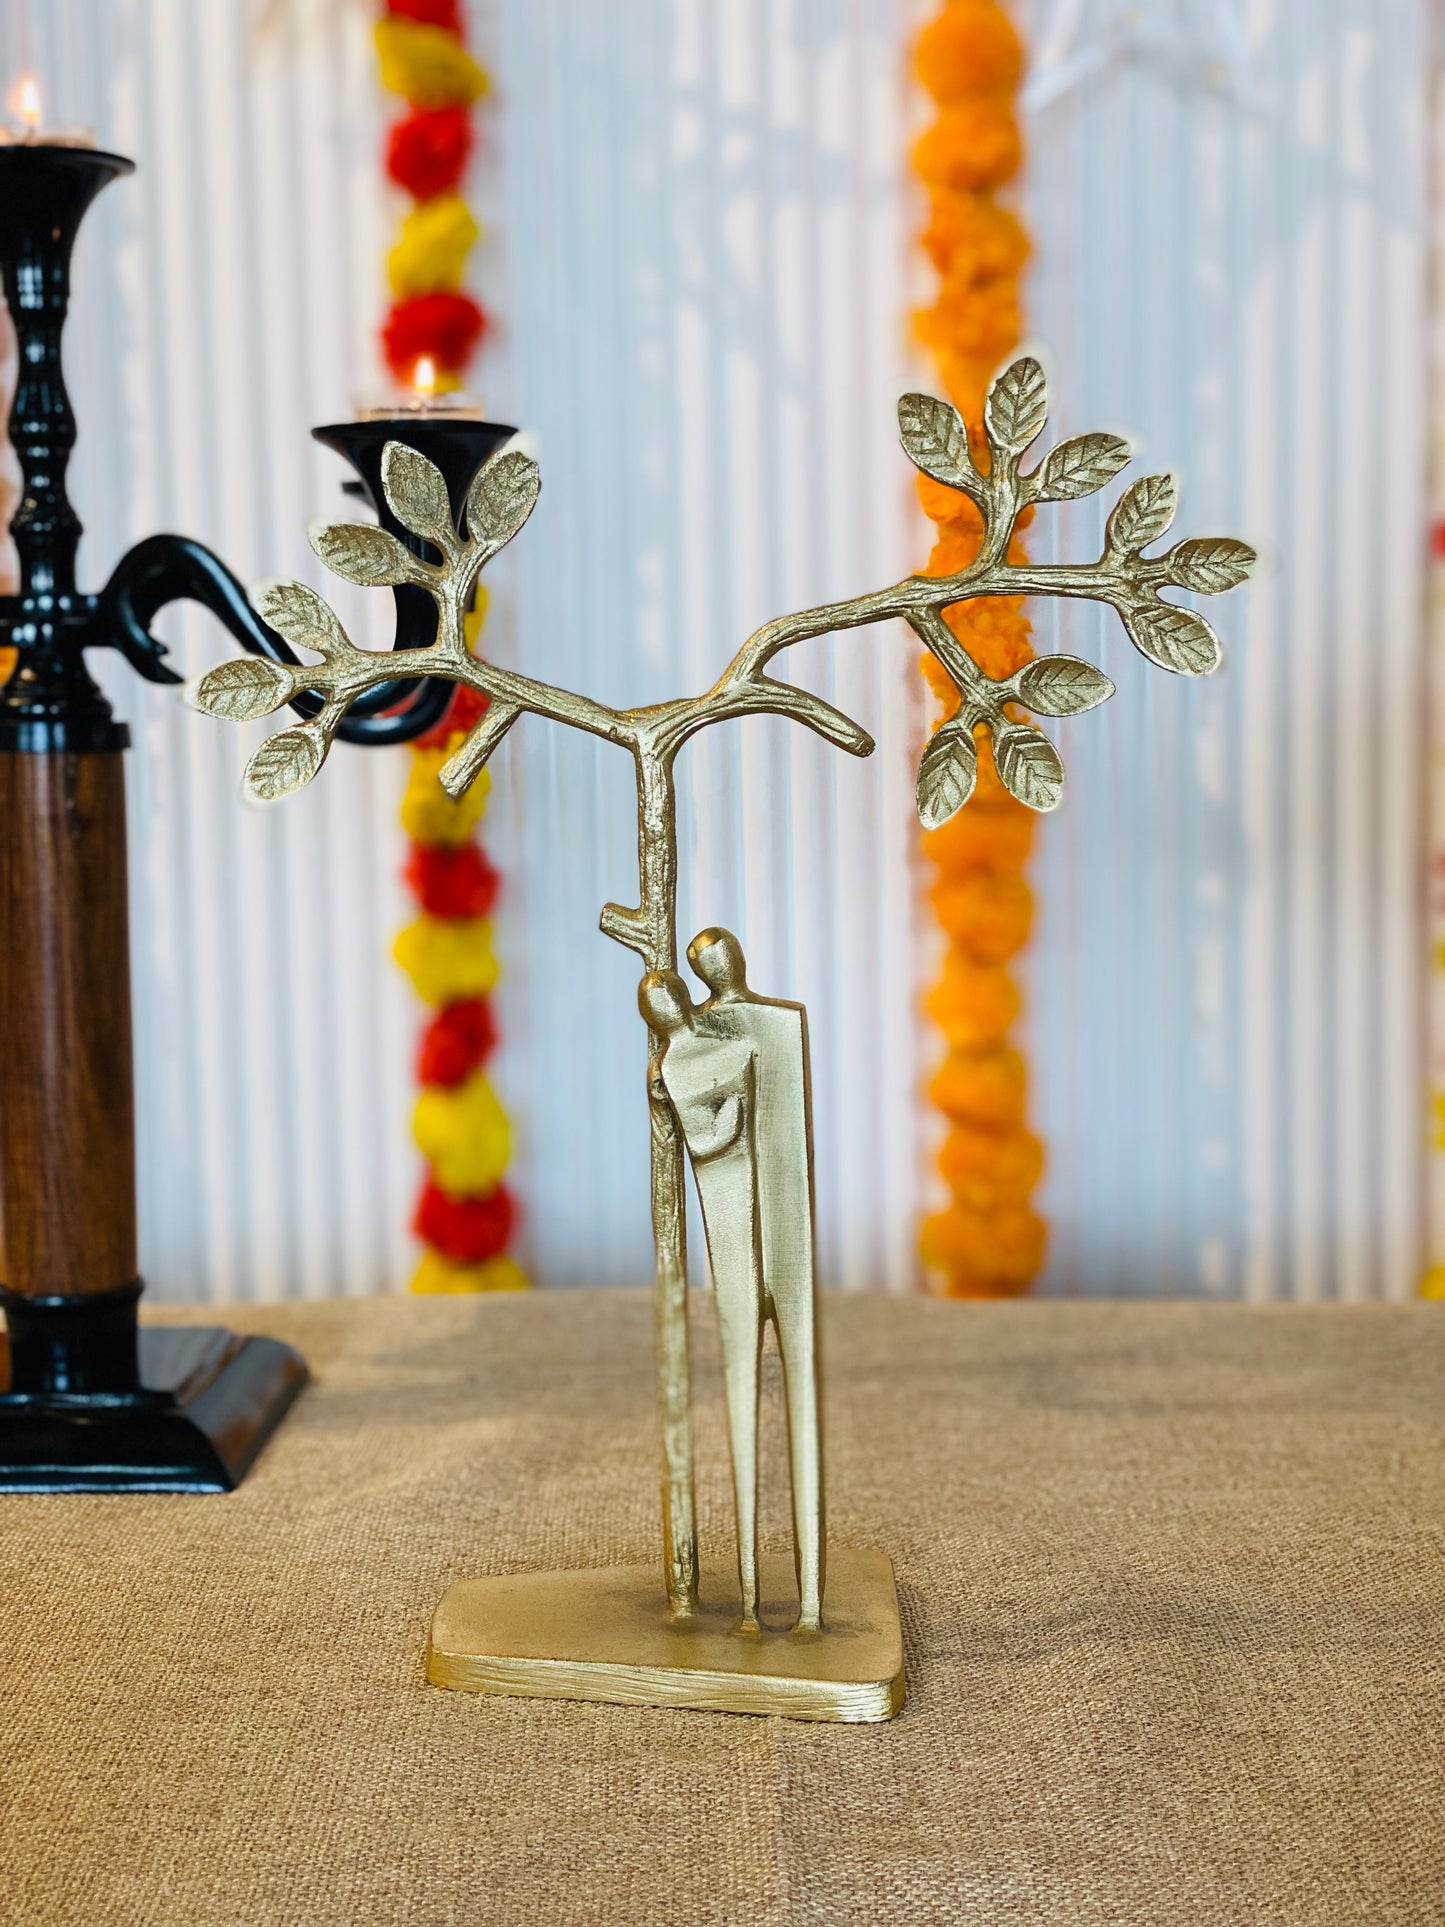 The Tree of Life Metal Sculpture